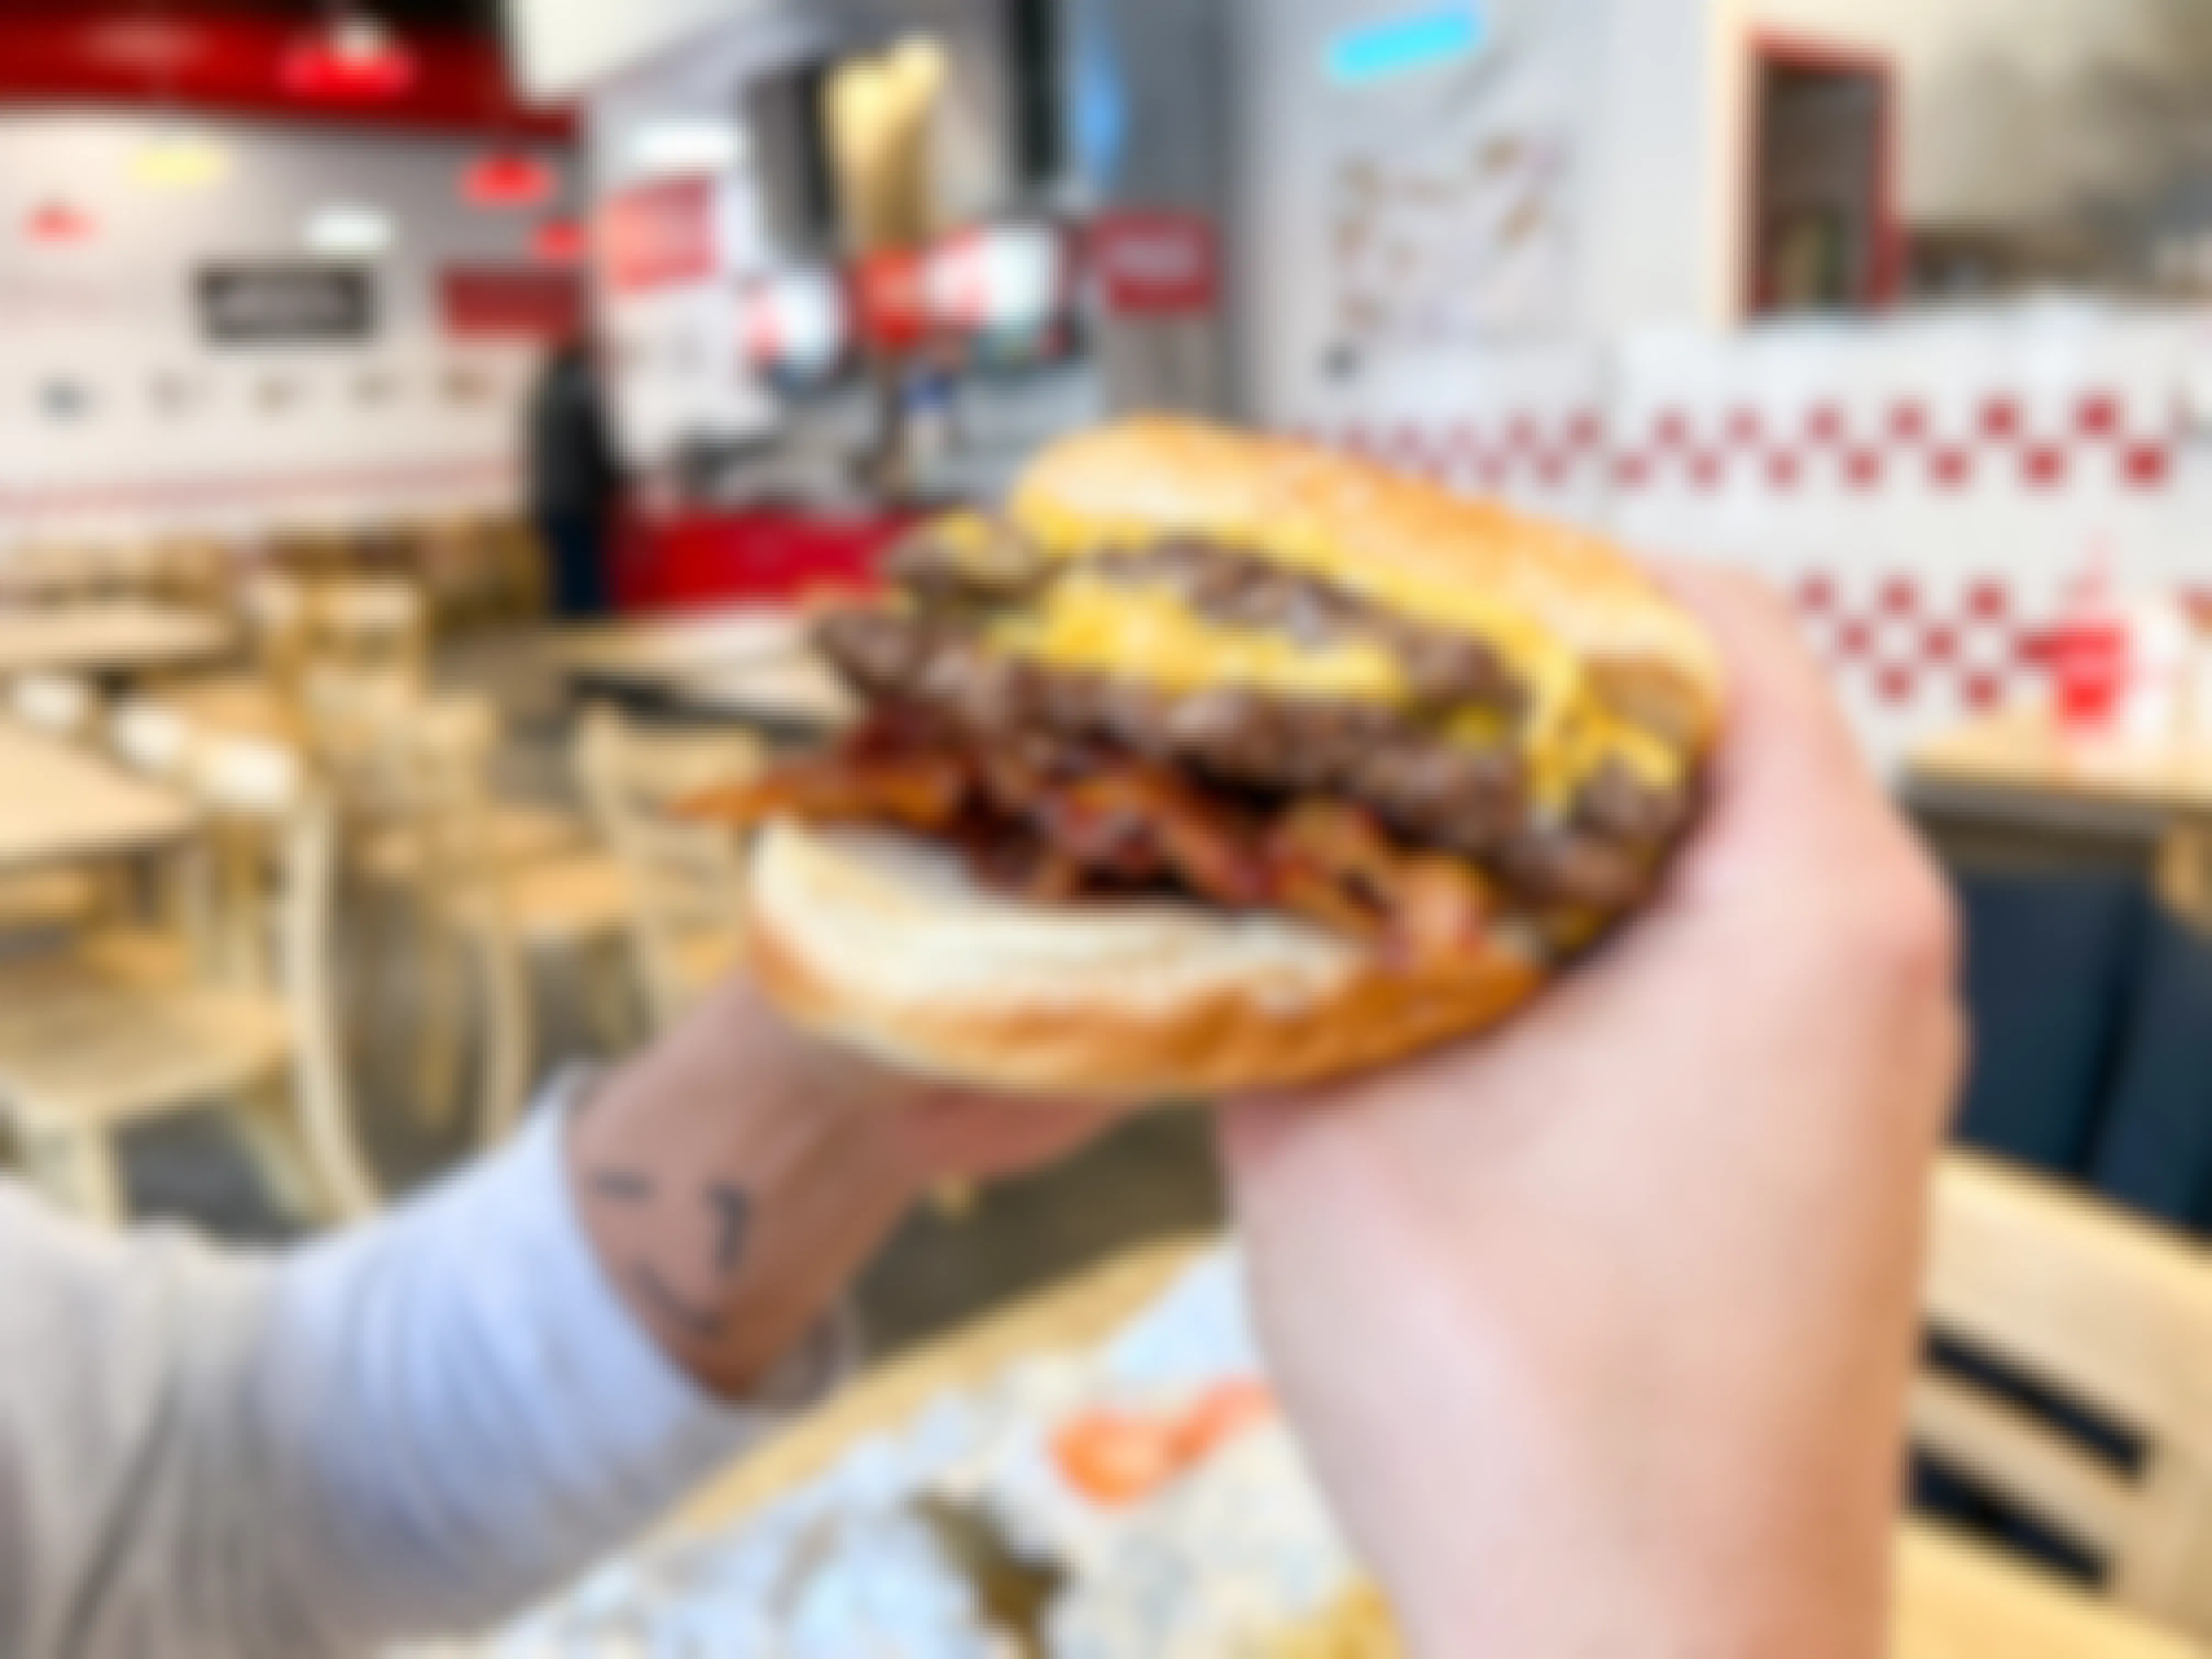 11 Tasty Tips to Get Five Guys Burgers for Cheap